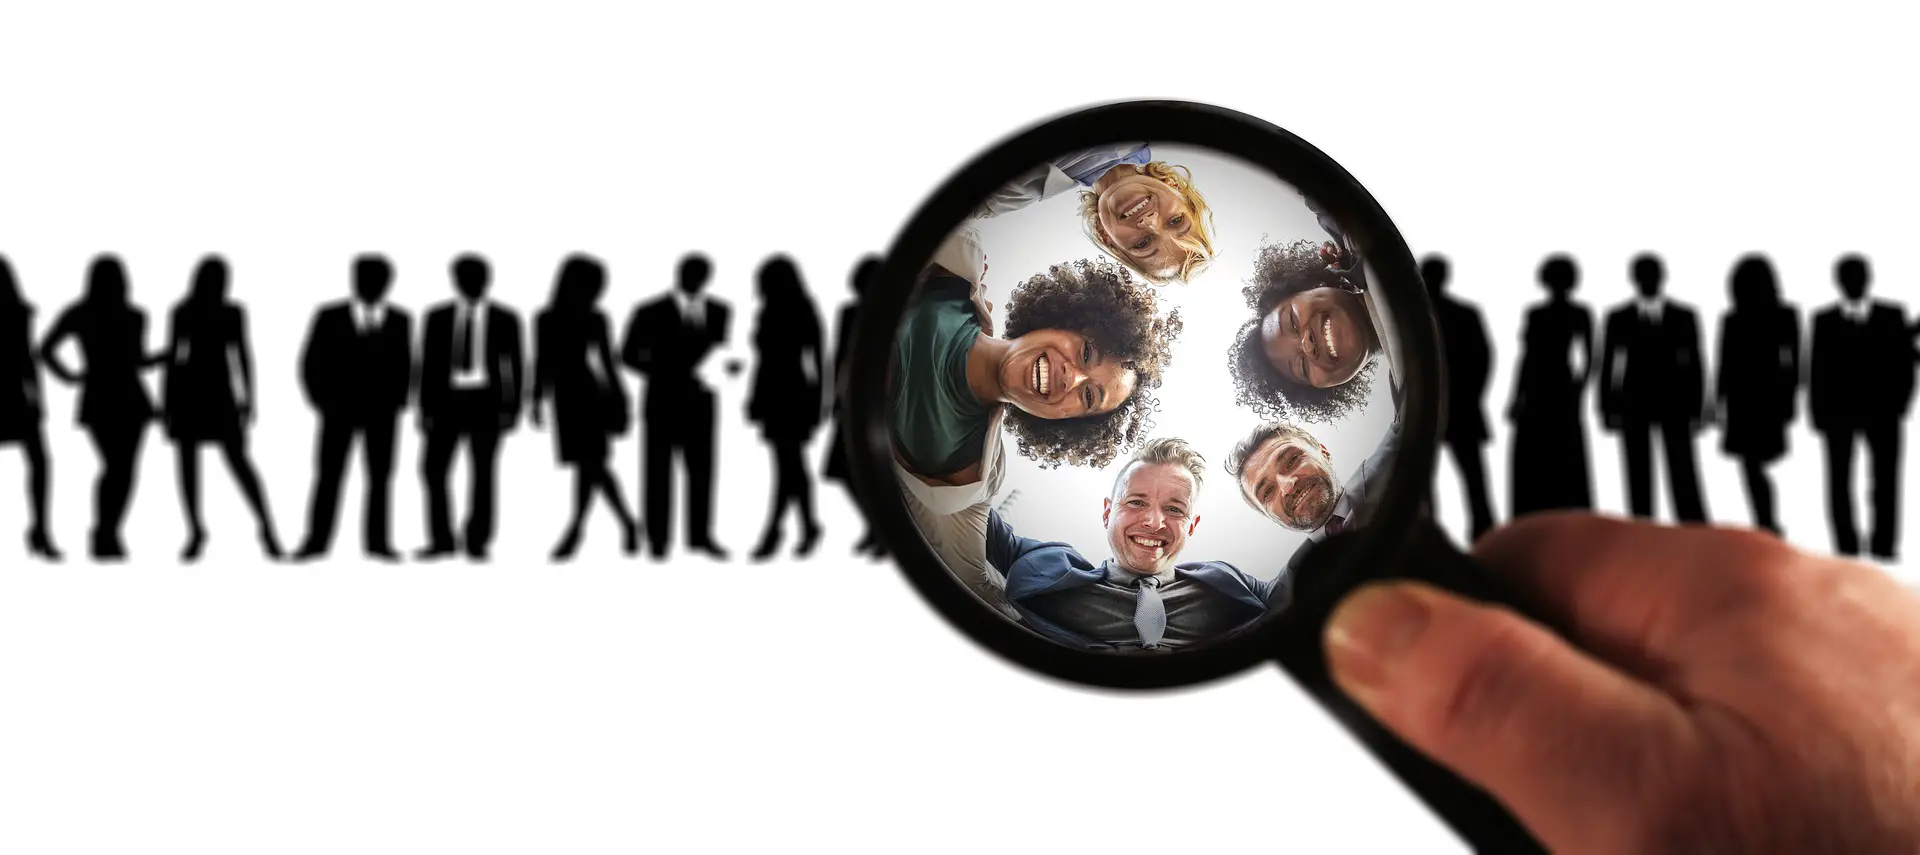 A magnifying glass pointing out a few people in a crowd.